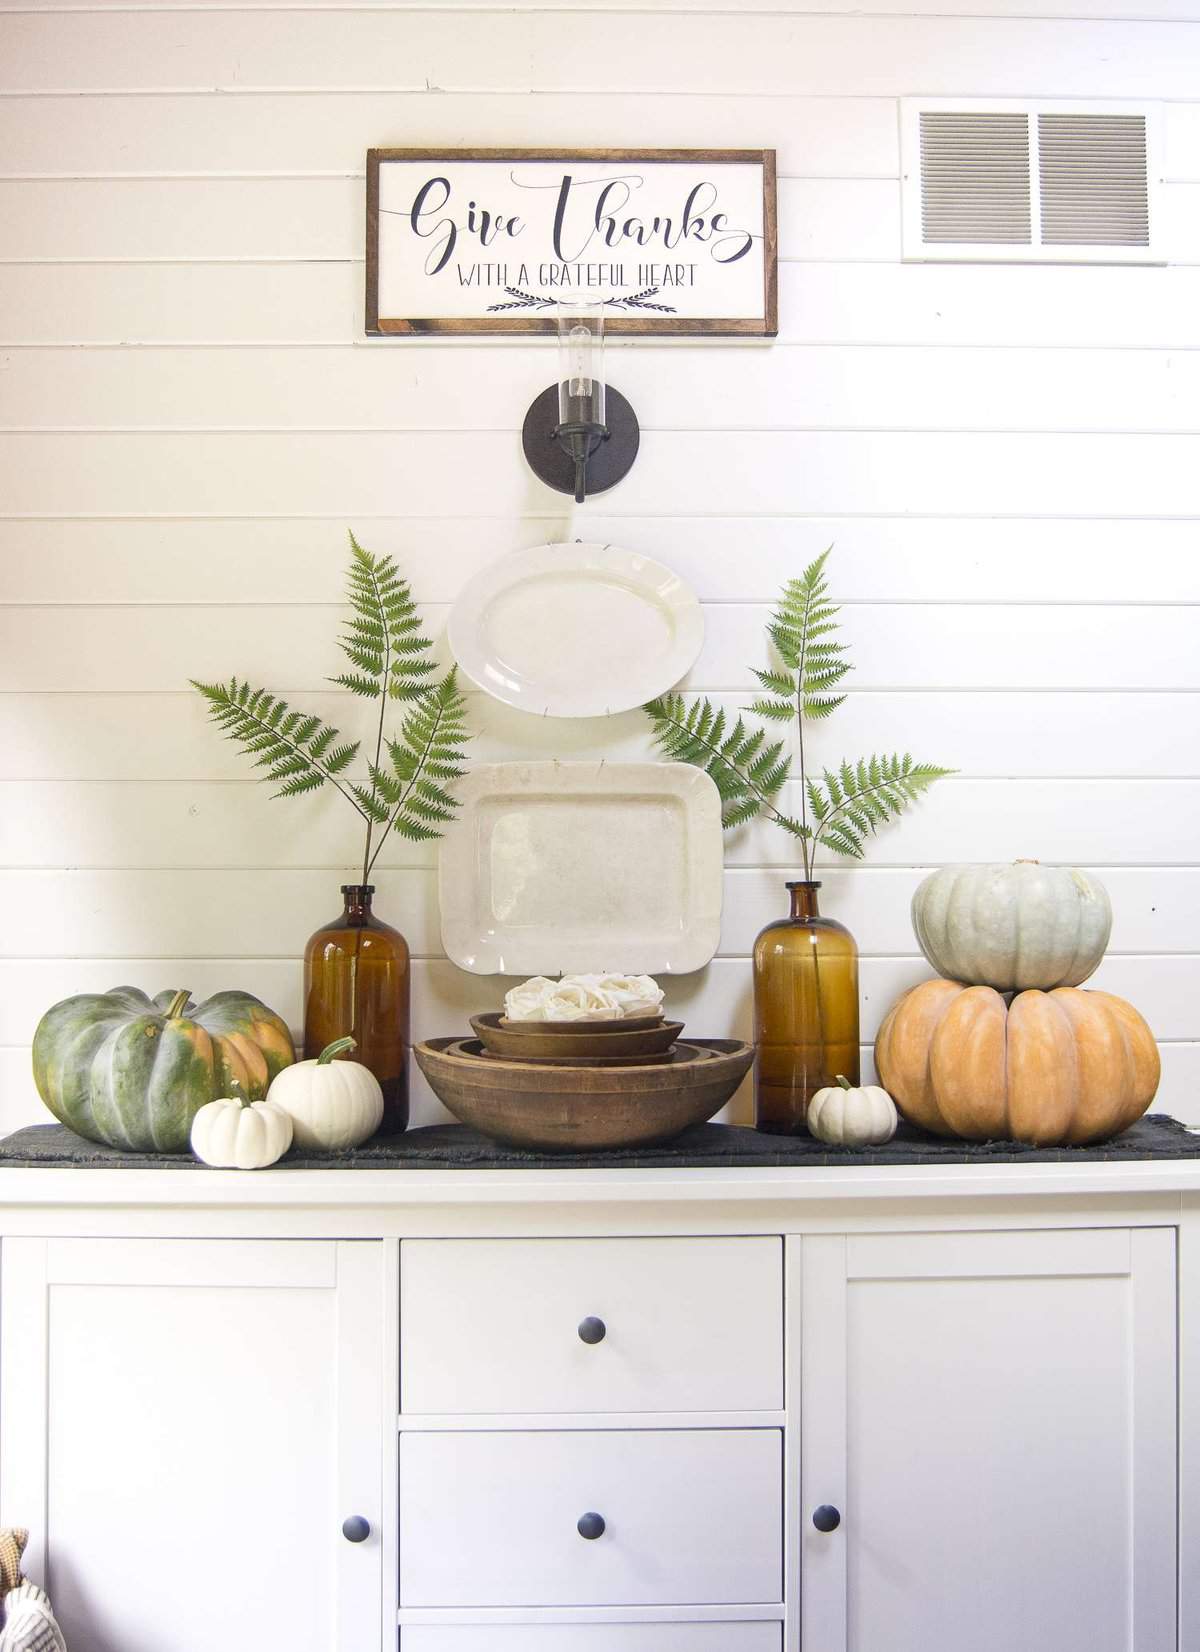 Do you need new ideas for beautiful dining room decor without all the fuss? Click here to see two simple ways to create a styled fall dining room with ease.